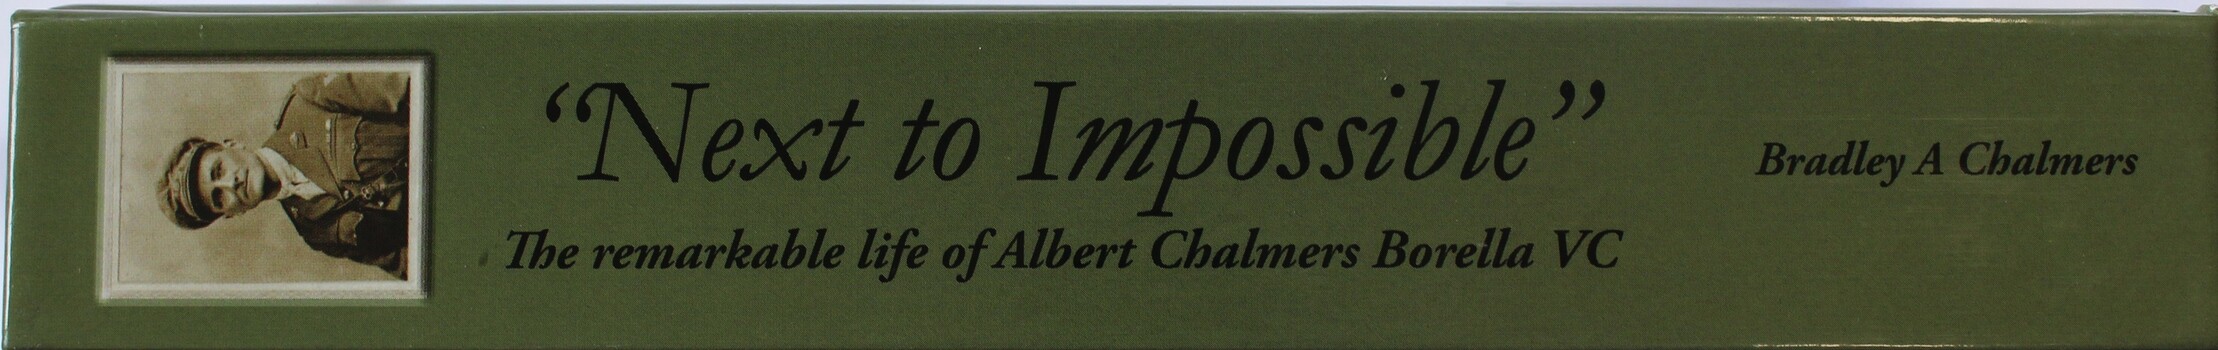 "Next to Impossible" The Remarkable LIfe of Albert Chalmers Borella VC - spine Label